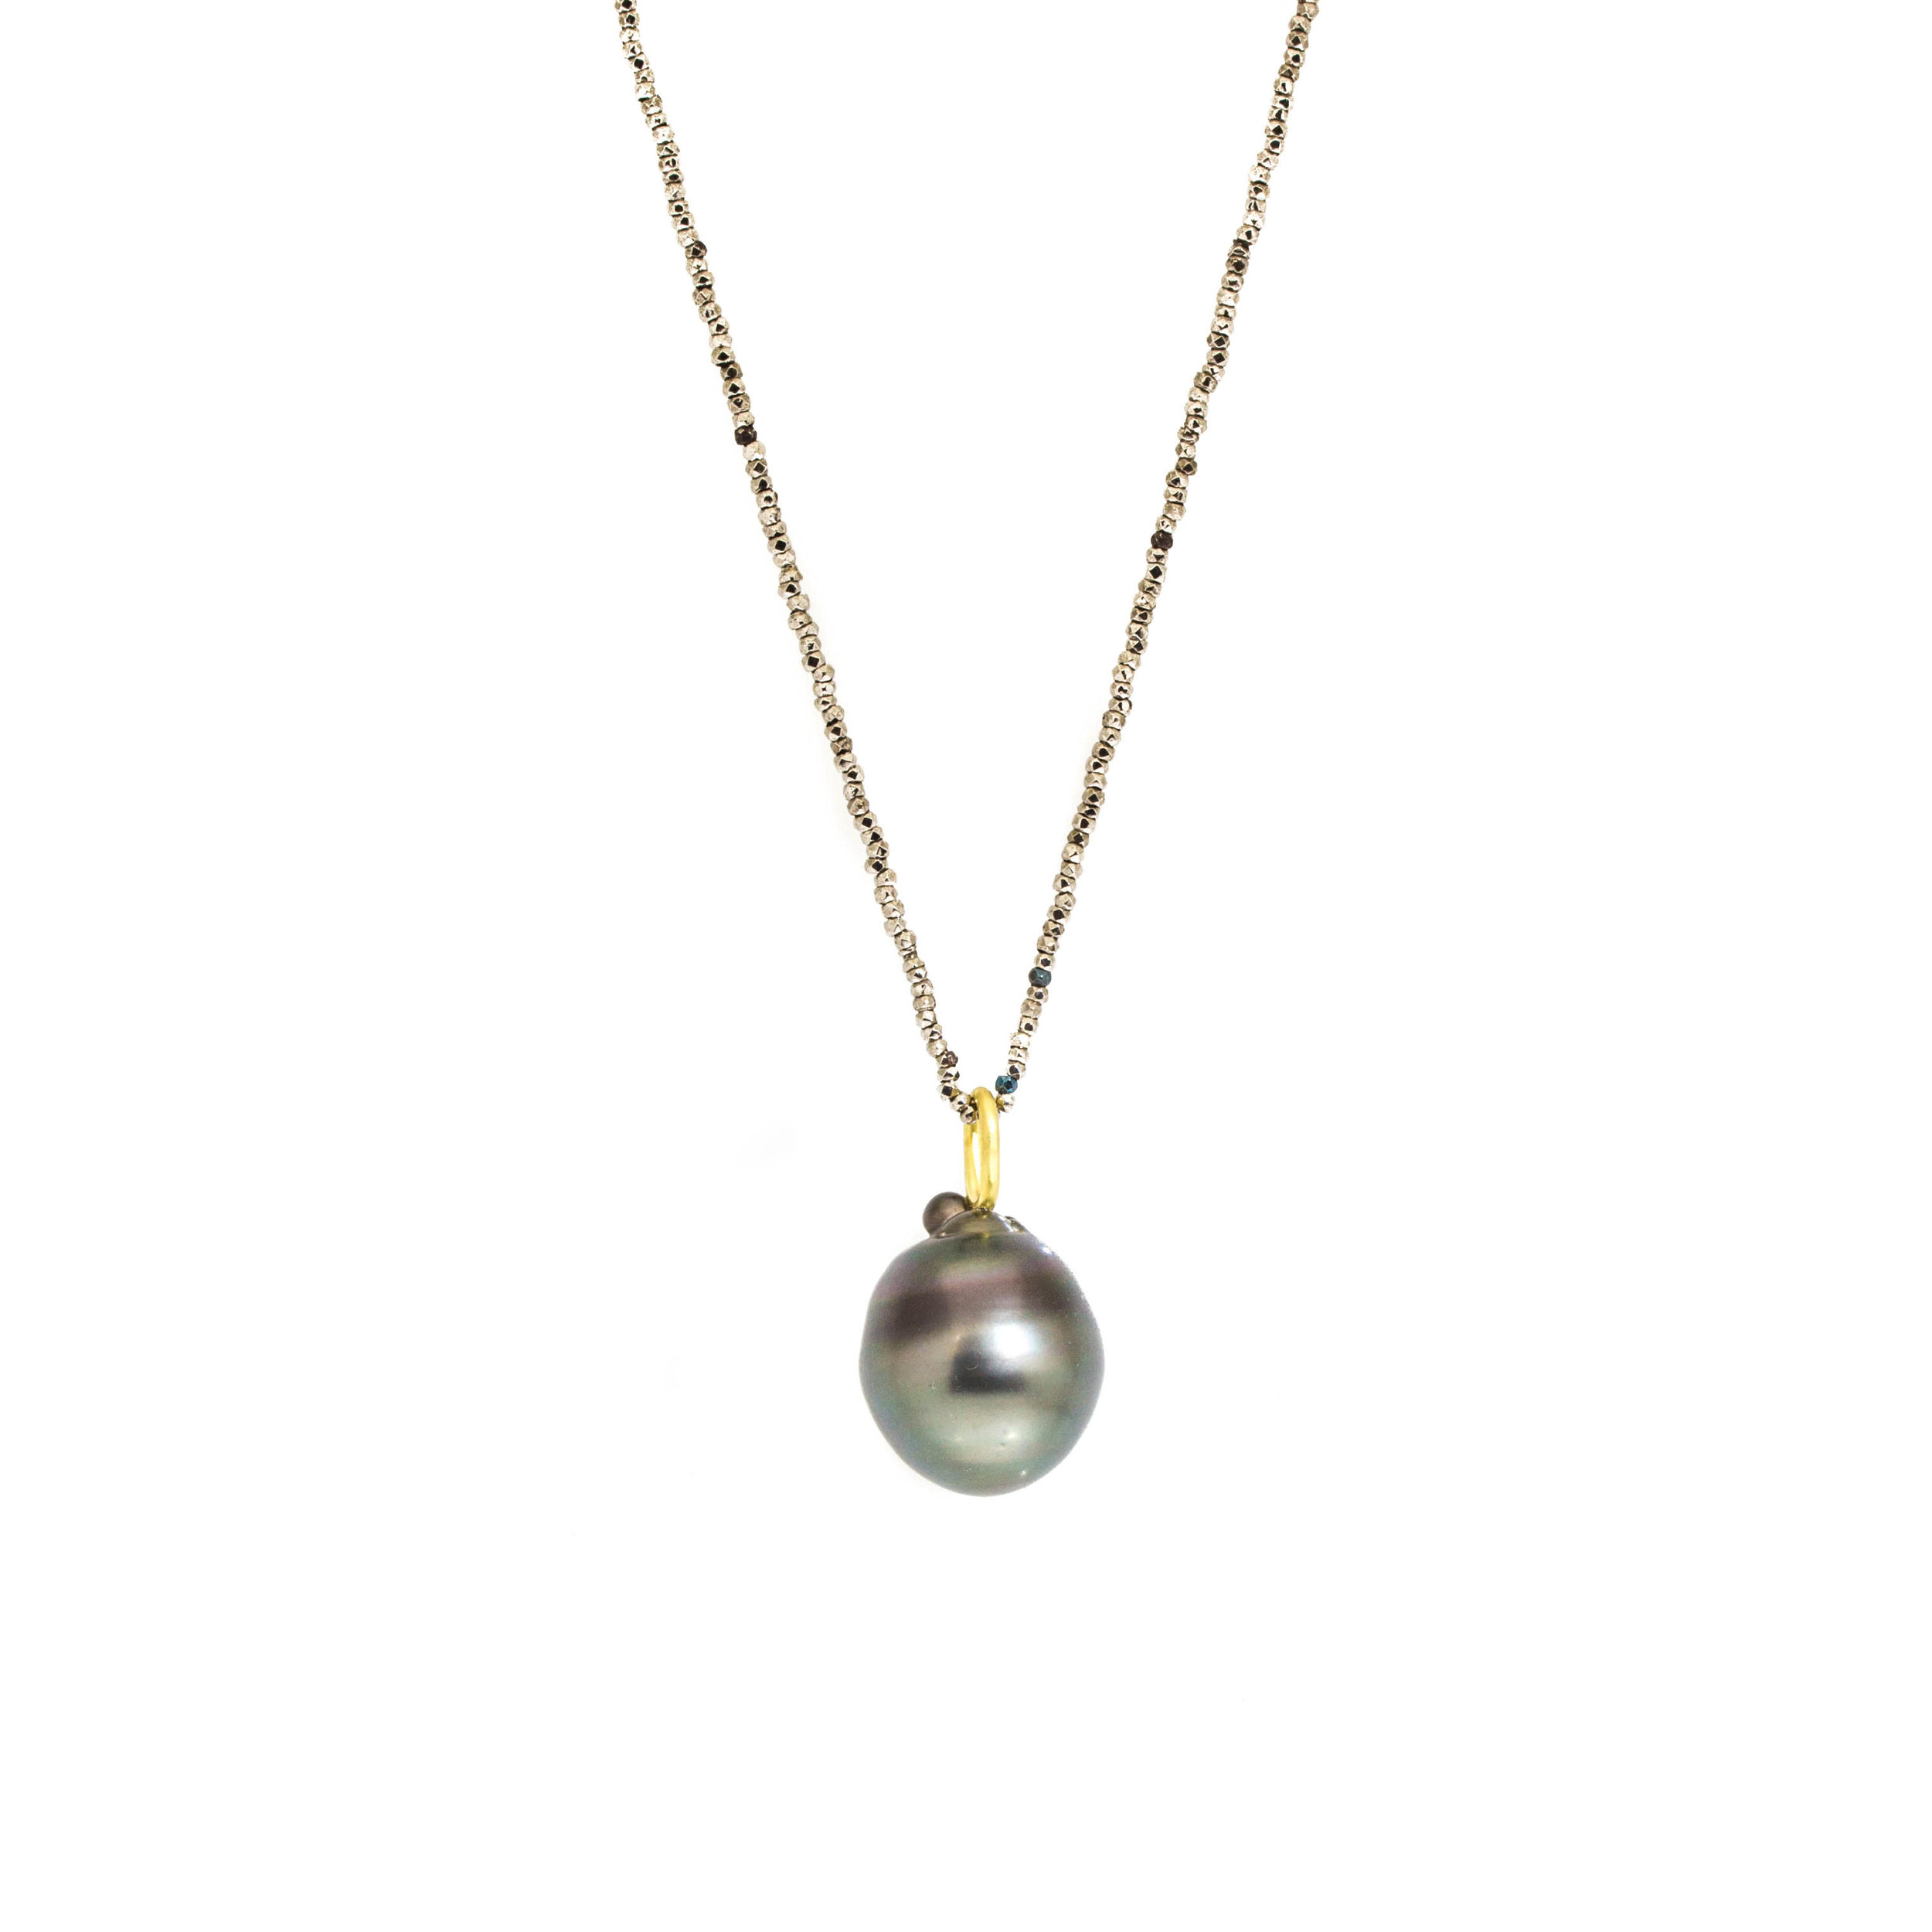 Black Tahitian Drop Pendant with 18k Yellow Gold and Shown on a Steel Cut Beaded Chain